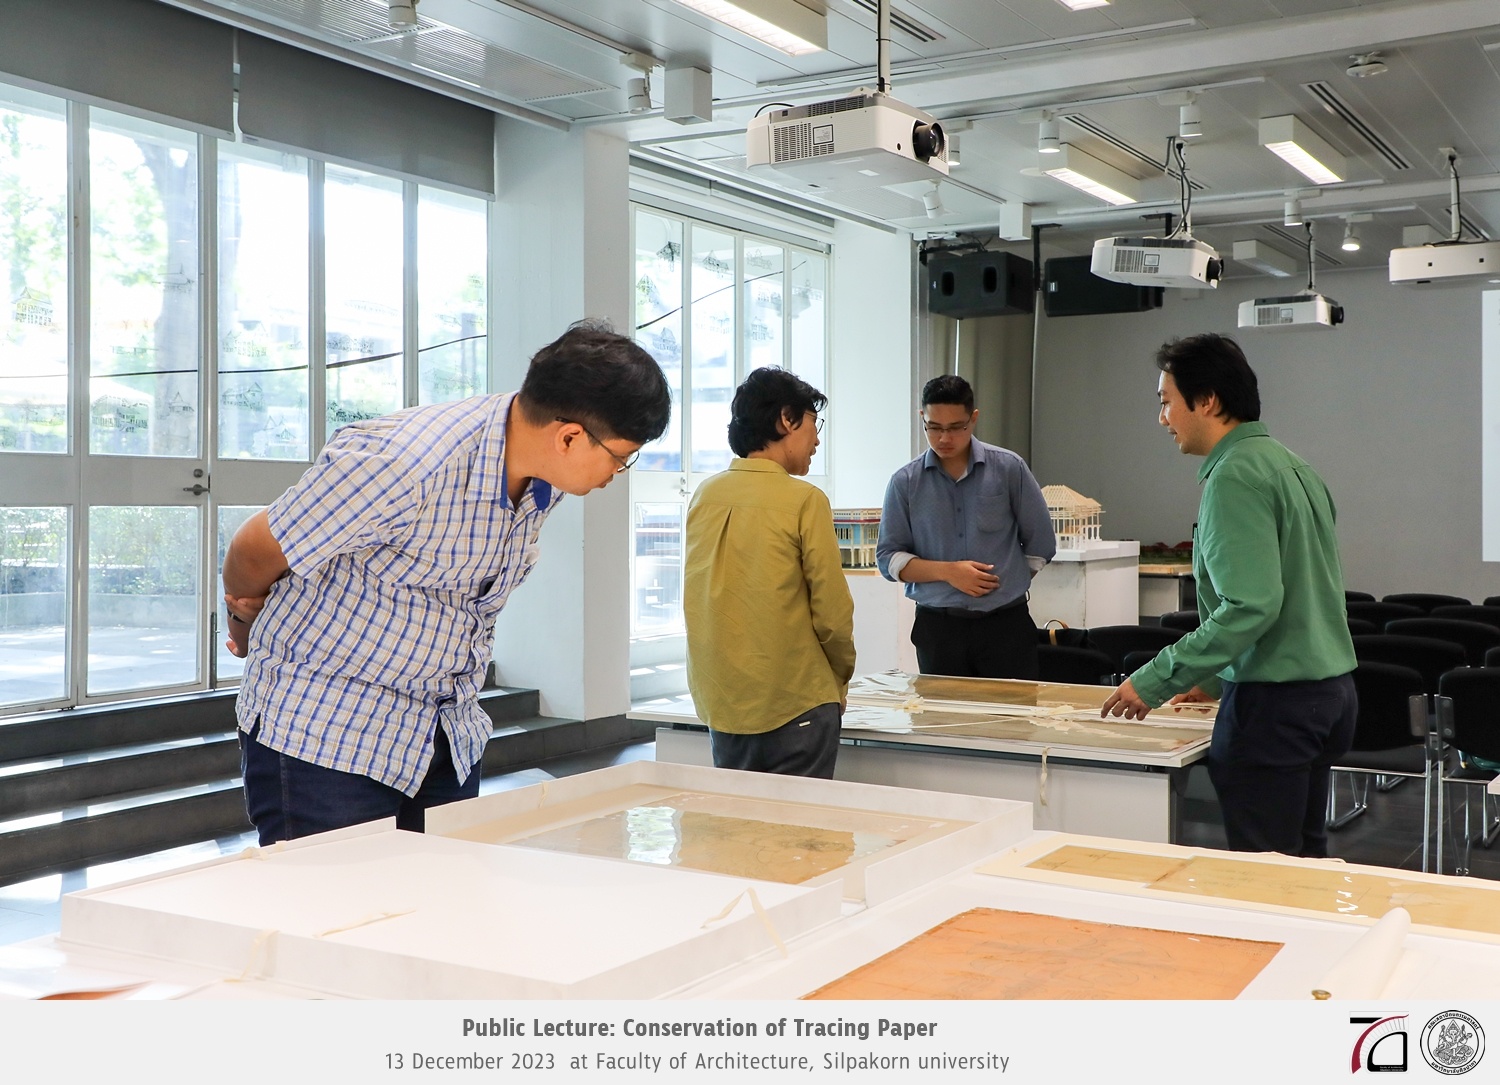 Public Lecture: Conservation of Tracing Paper